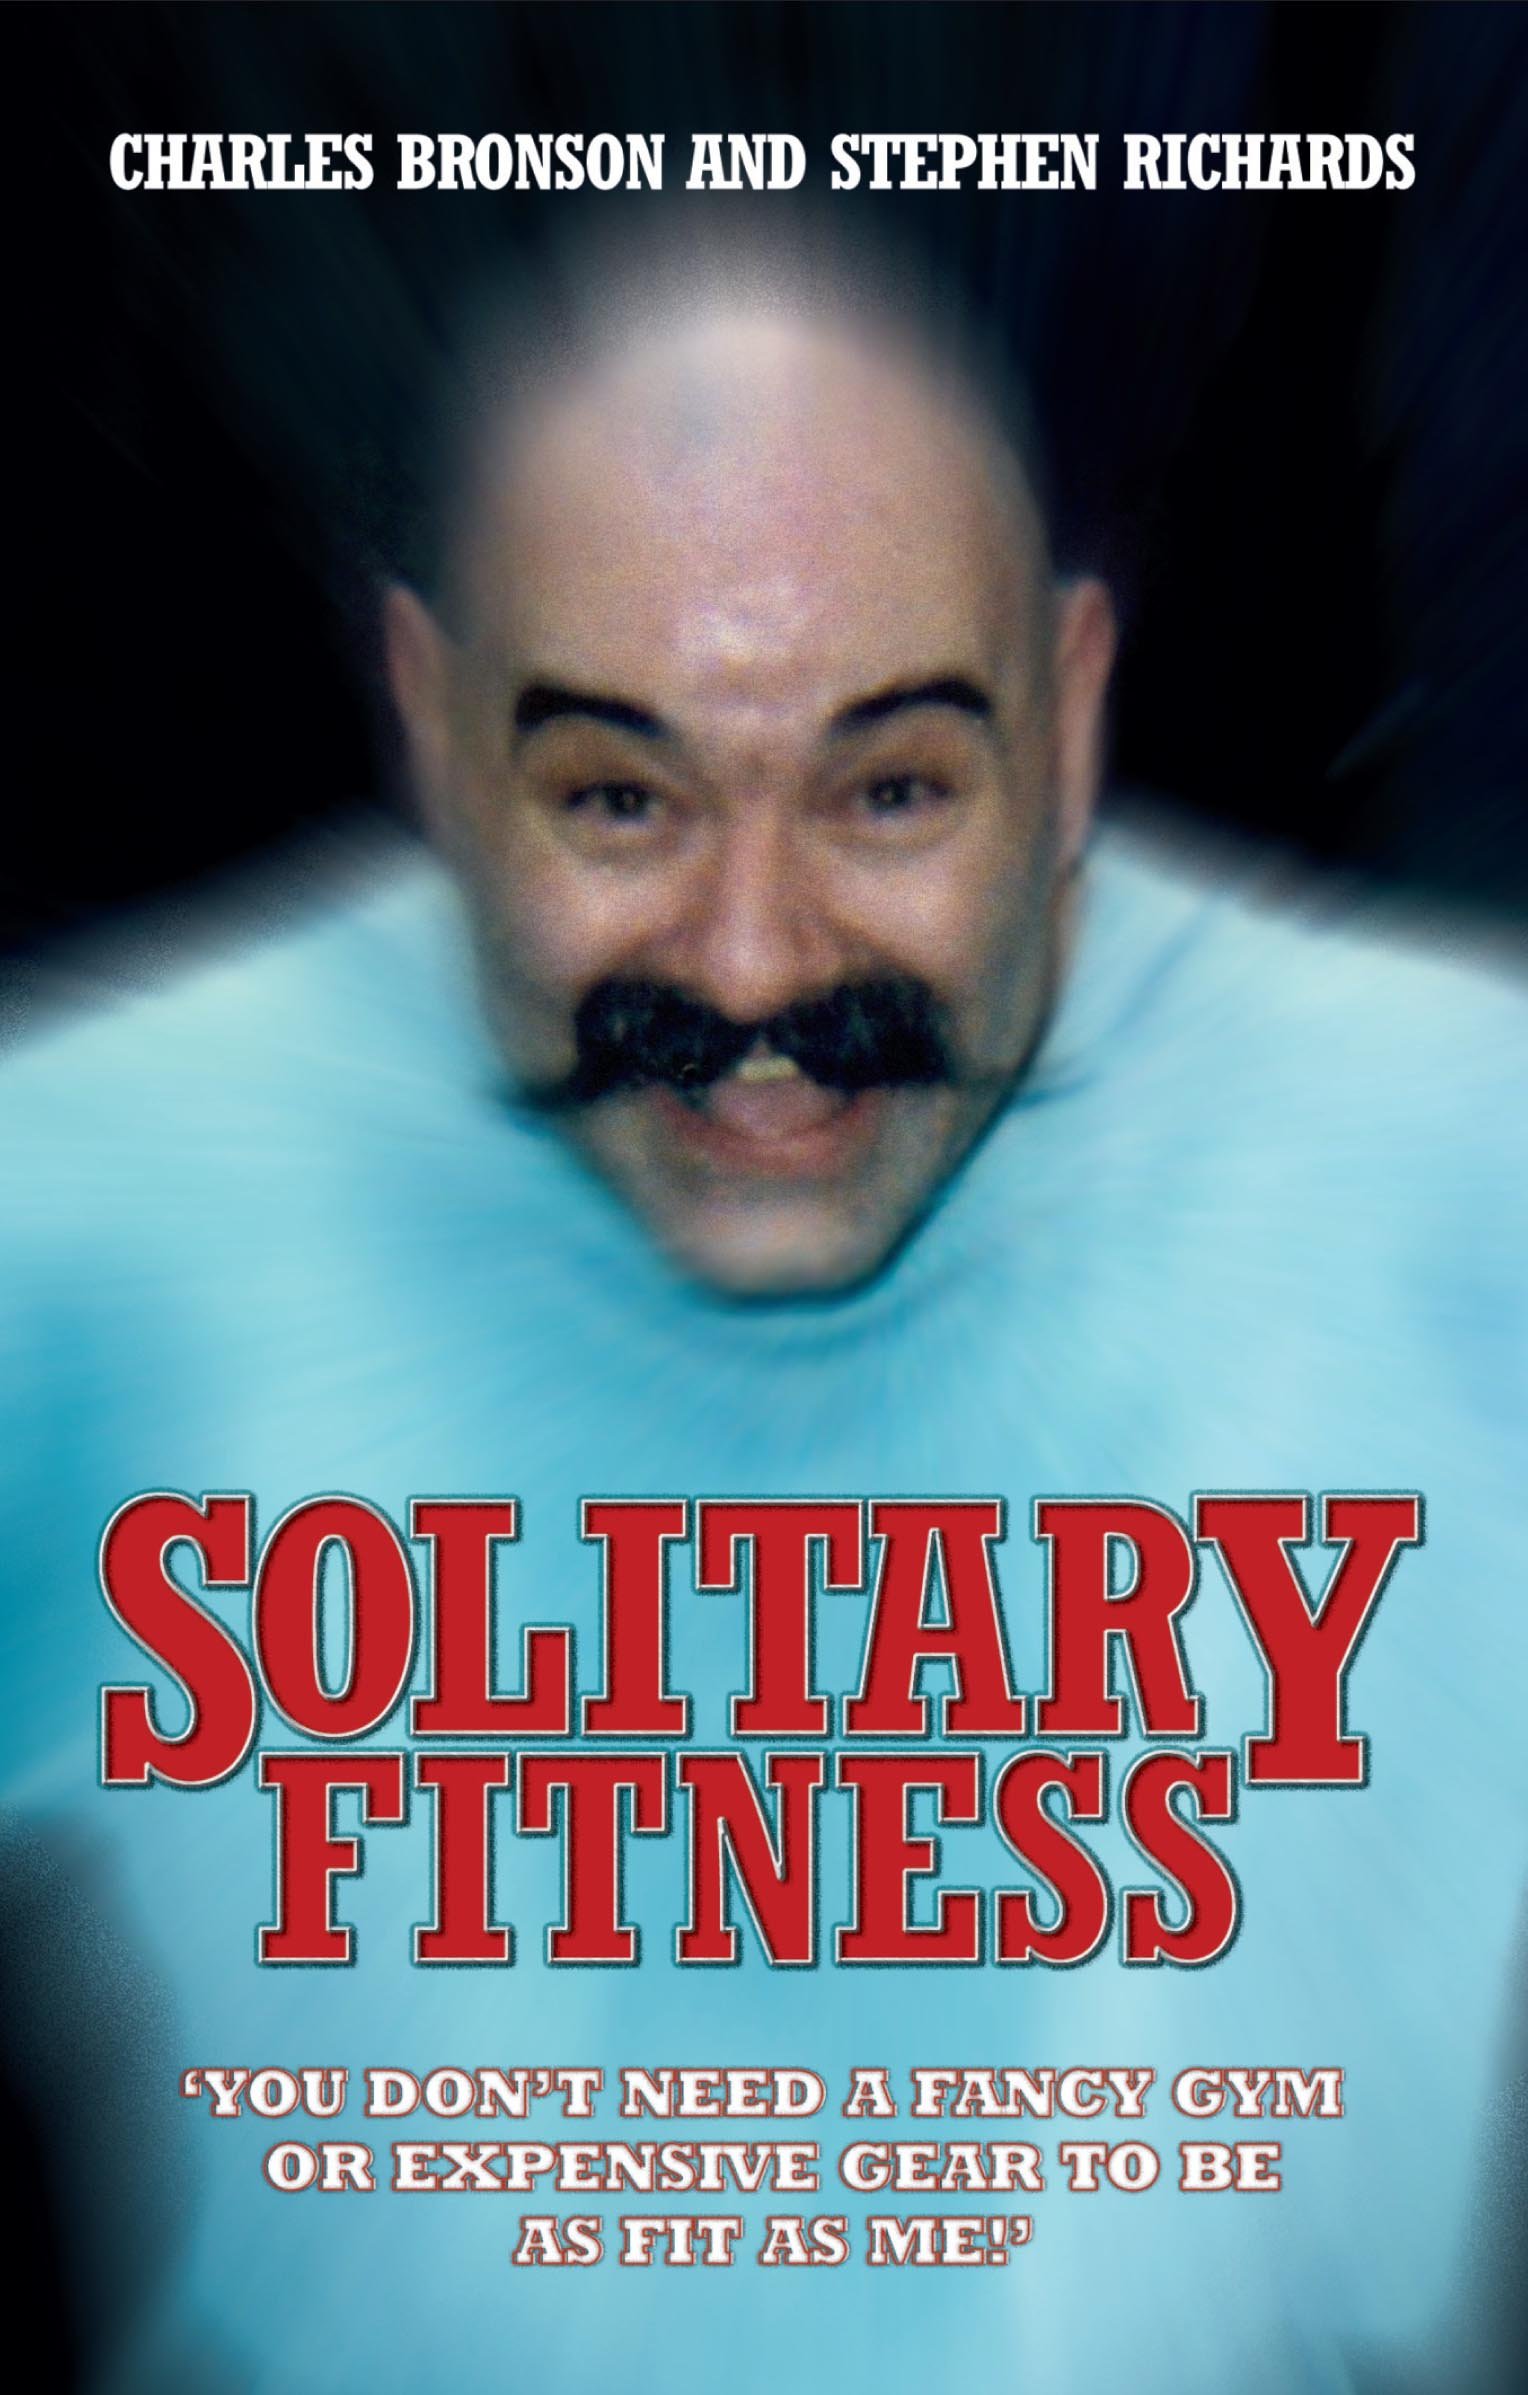 Solitary Fitness - You Don't Need a Fancy Gym or Expensive Gear to be as Fit as Me (Kindle eBook) by Charles Bronson $0.99